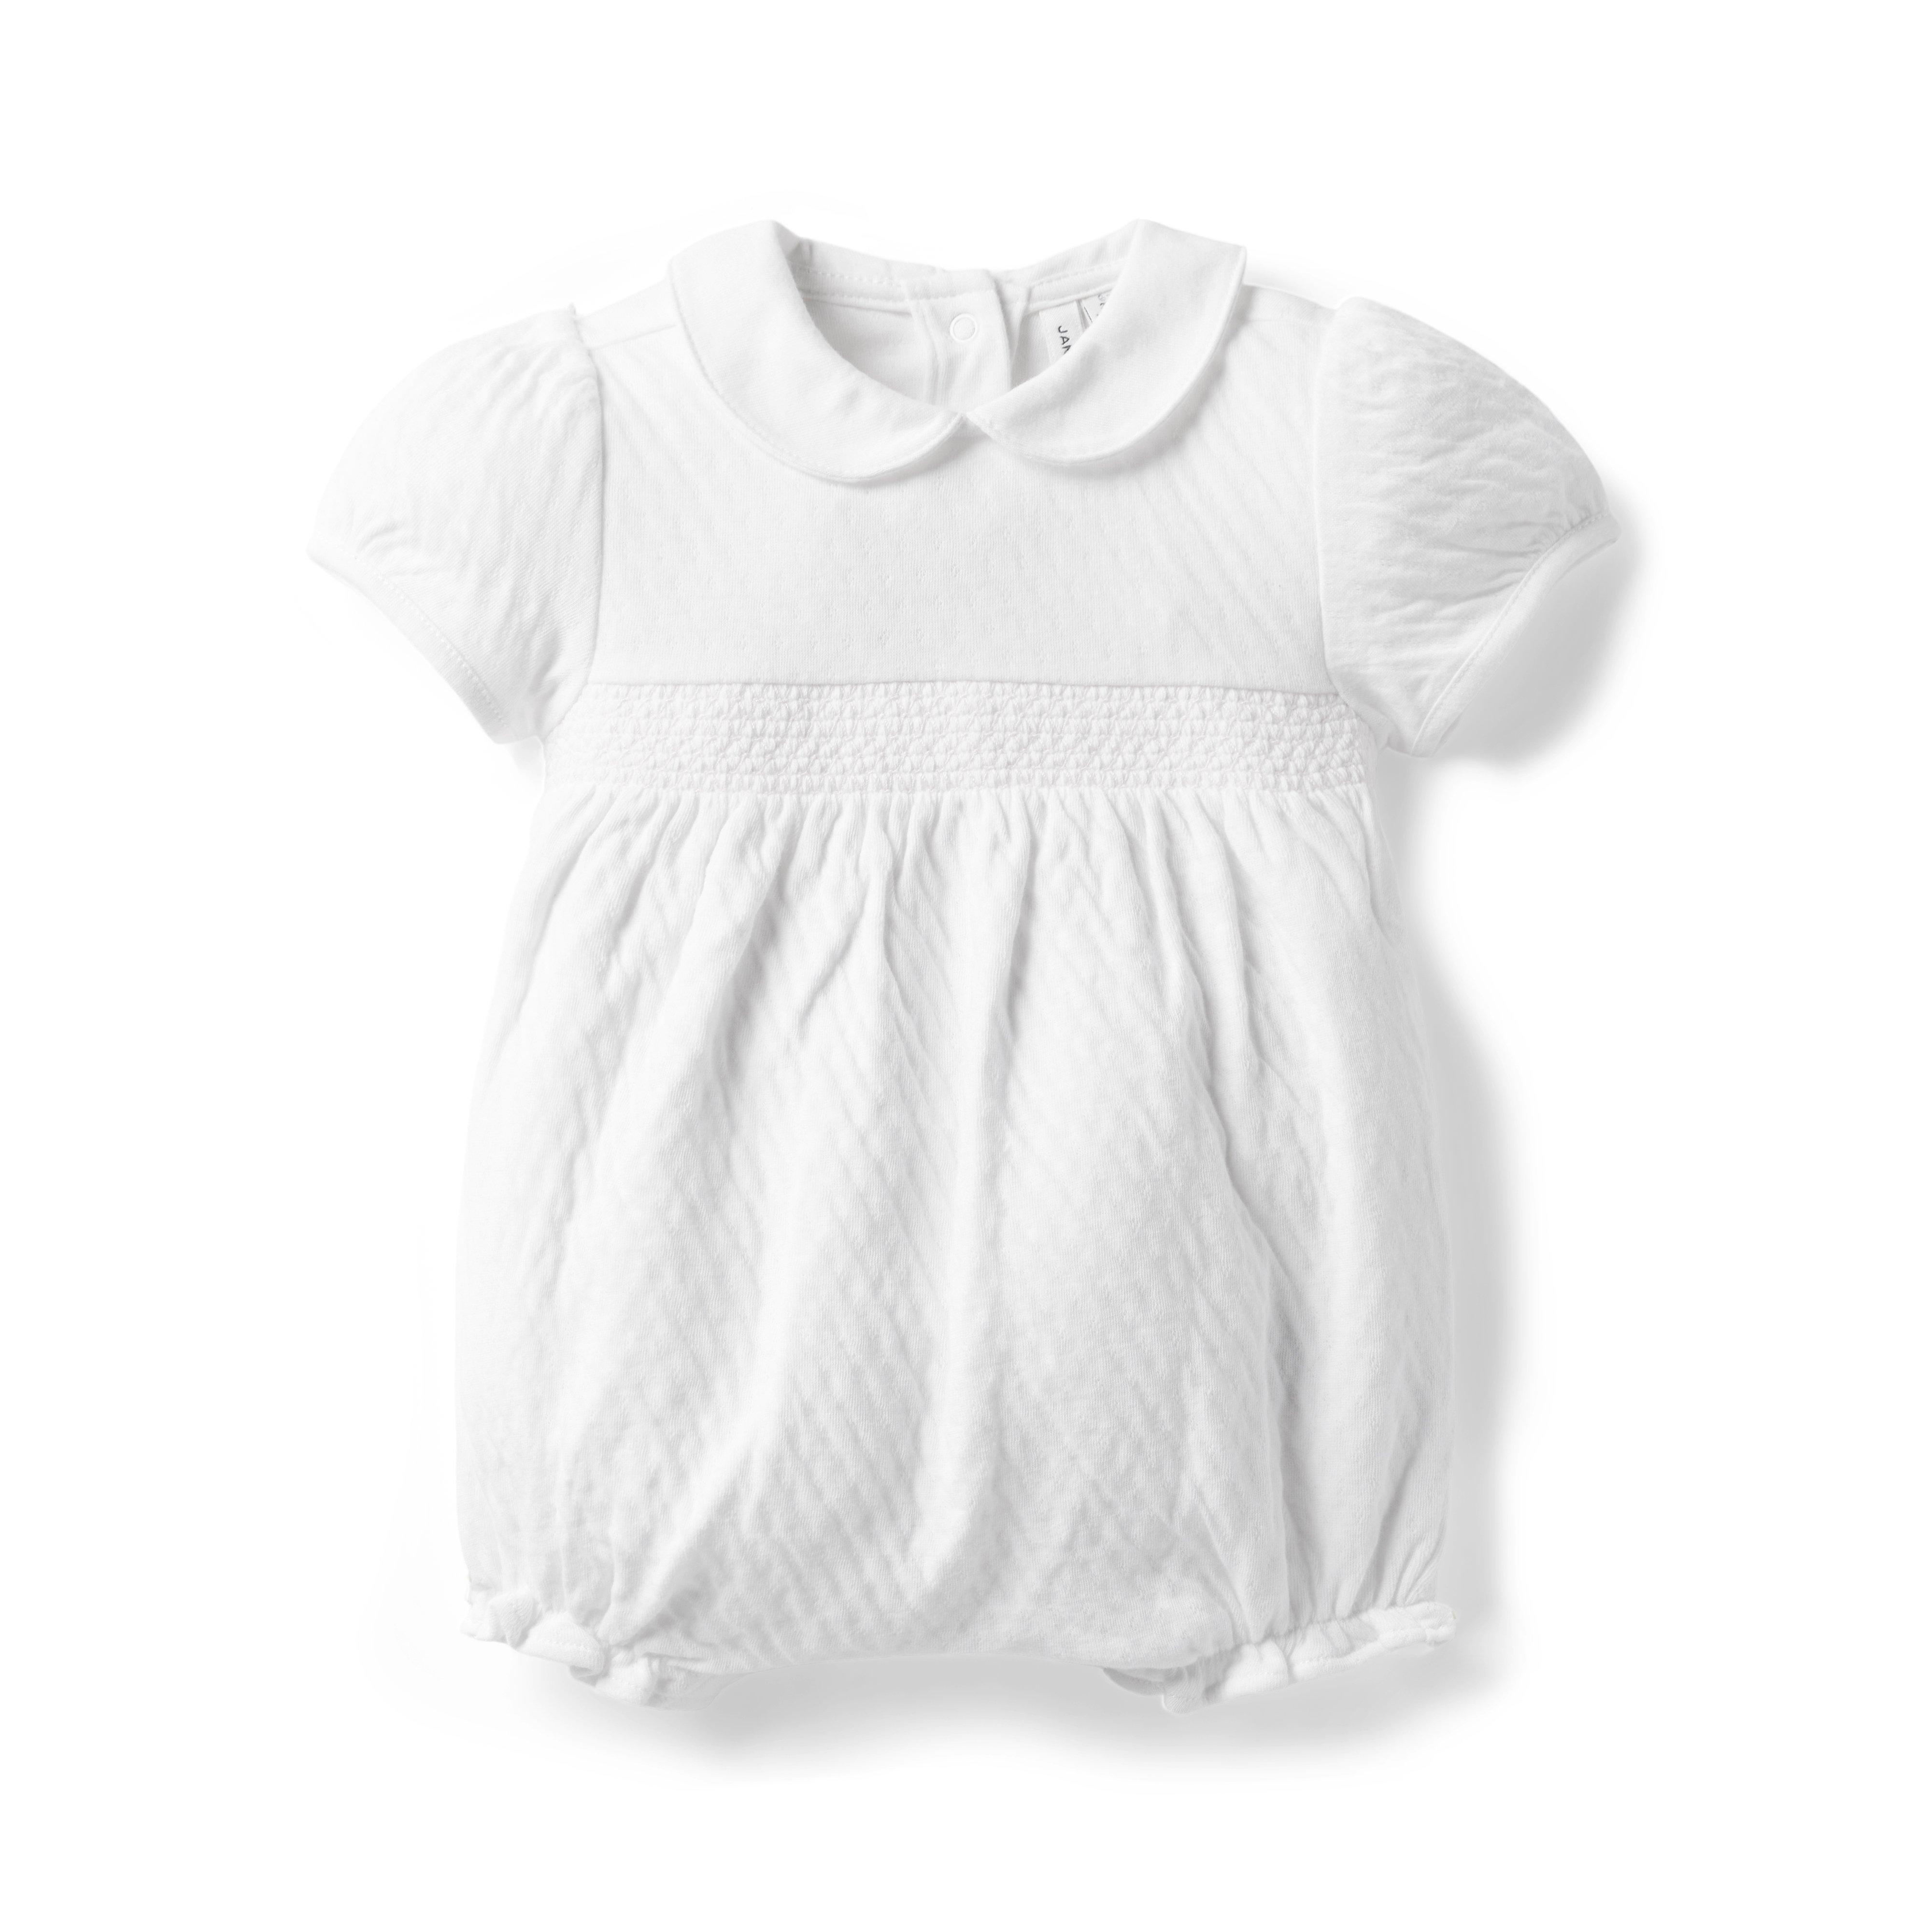 Newborn White The Charlotte Pointelle Smocked Baby Romper by Janie and Jack